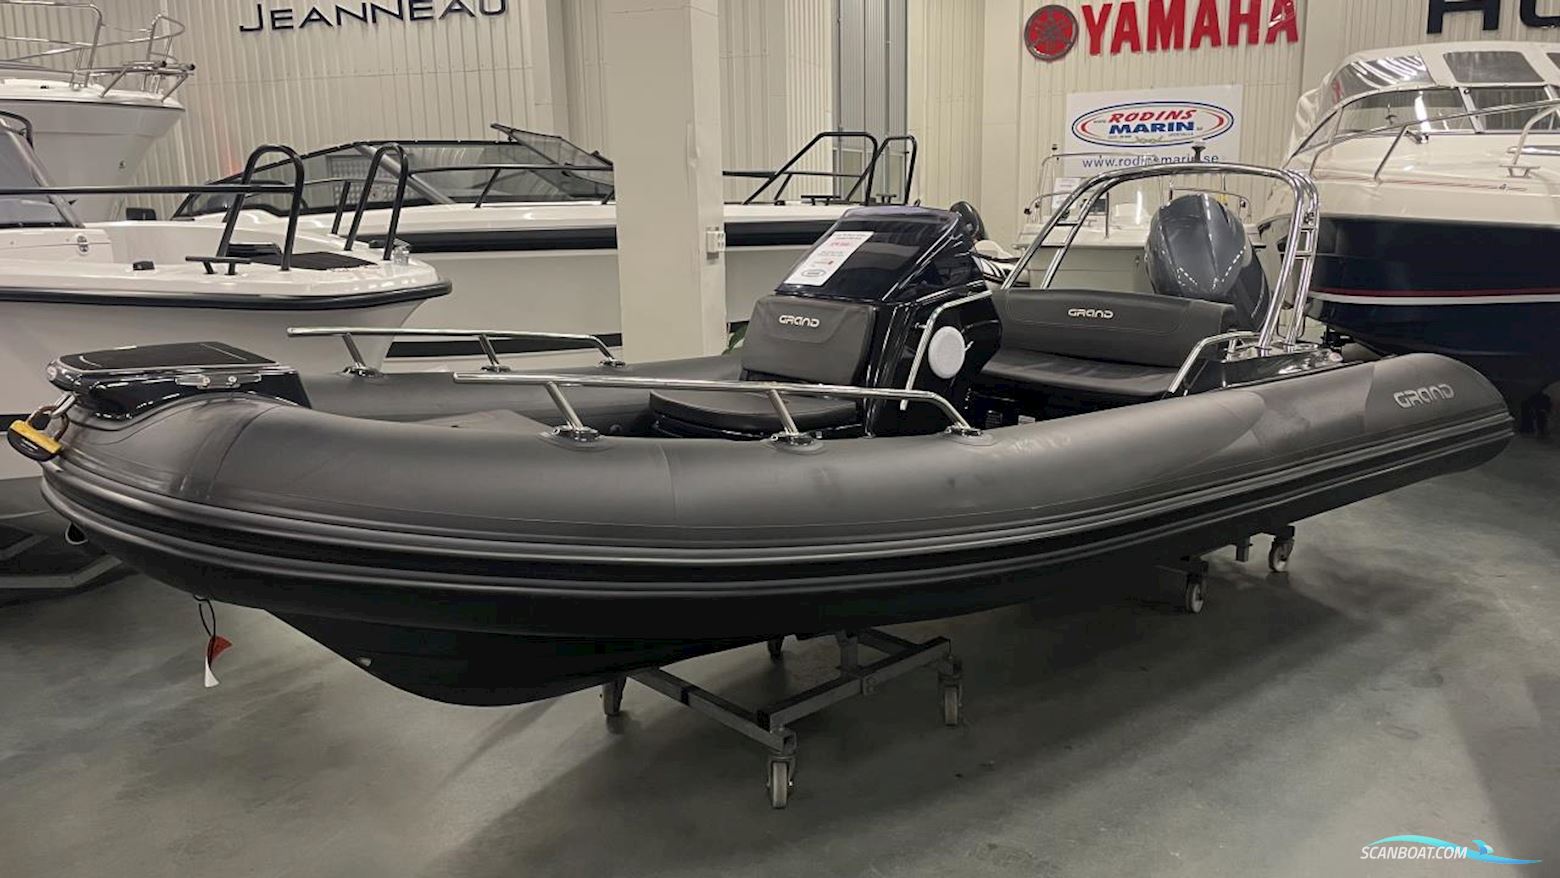 Grand Golden Line G500 Inflatable / Rib 2021, with Yamaha engine, Sweden